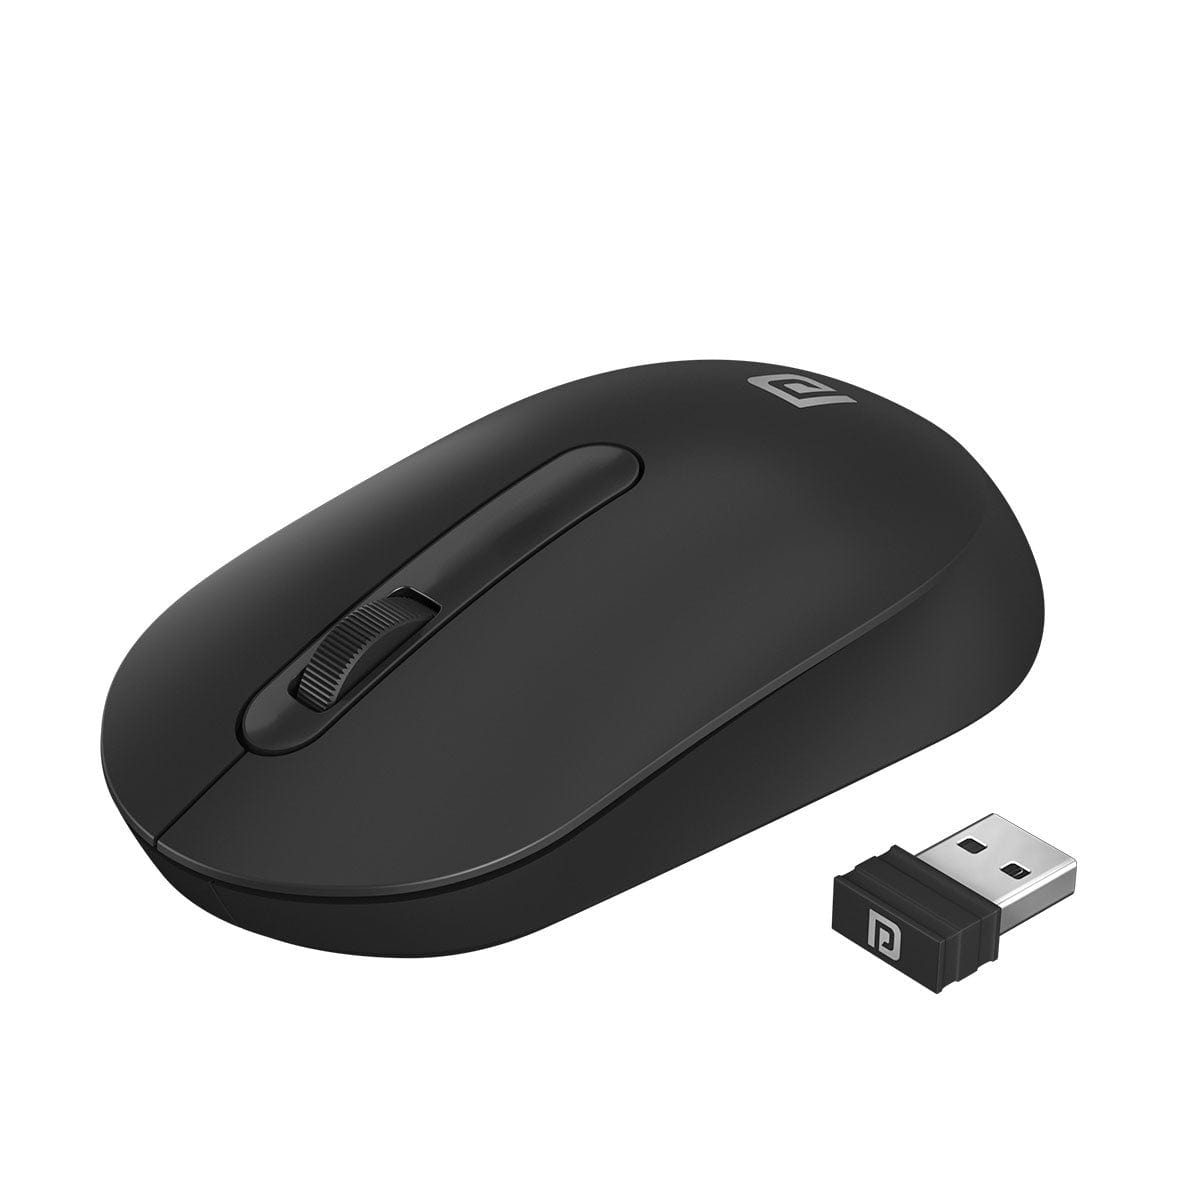 PORTRONICS-Toad 13 Wireless Optical Mouse